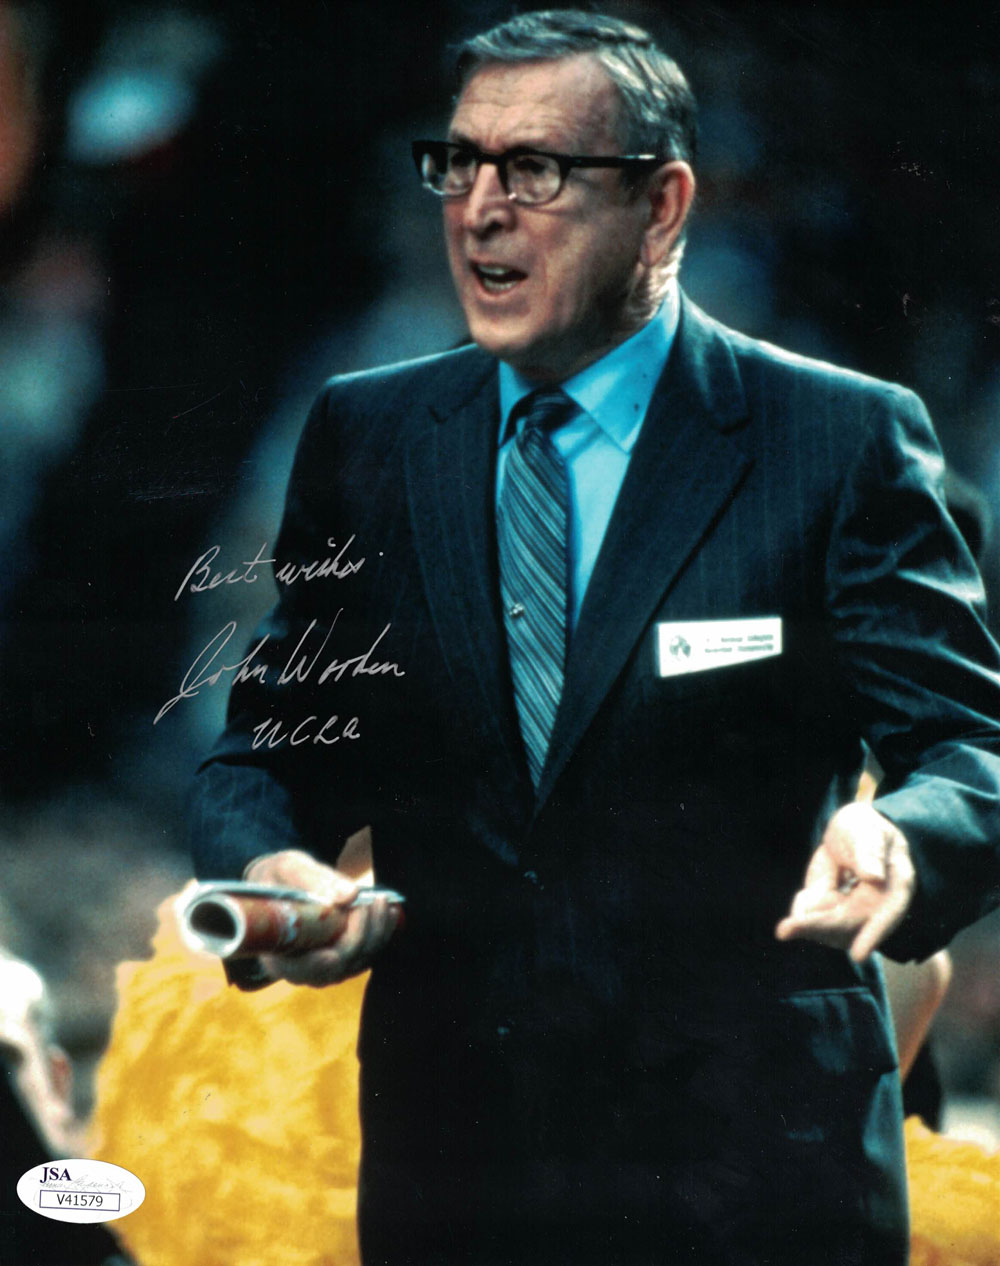 John Wooden Autographed UCLA Bruins 8x10 Photo Best Wishes As Is BAS 27151